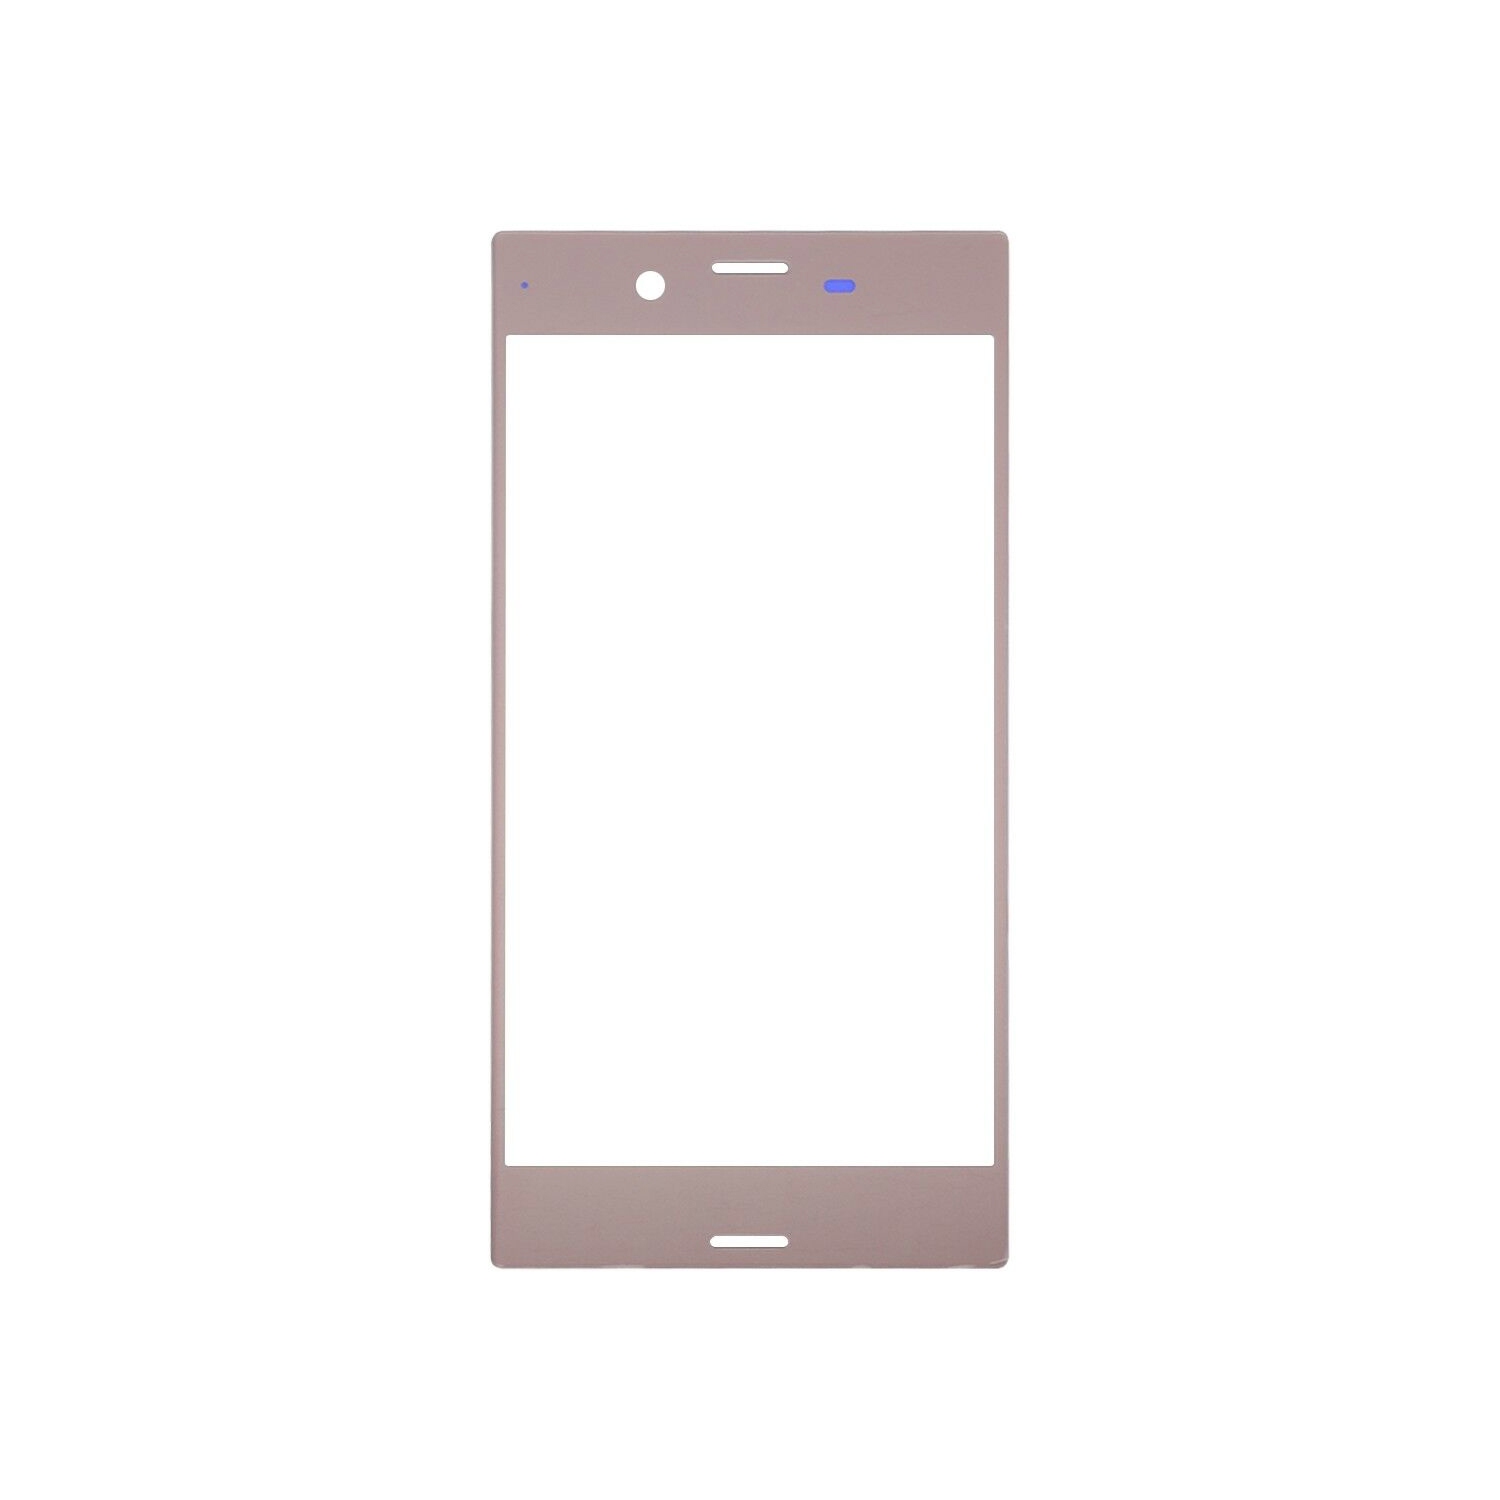 Replacement Front Top Glass Outer Screen Glass Lens Compatible With Sony Xperia XZ Premium - Pink